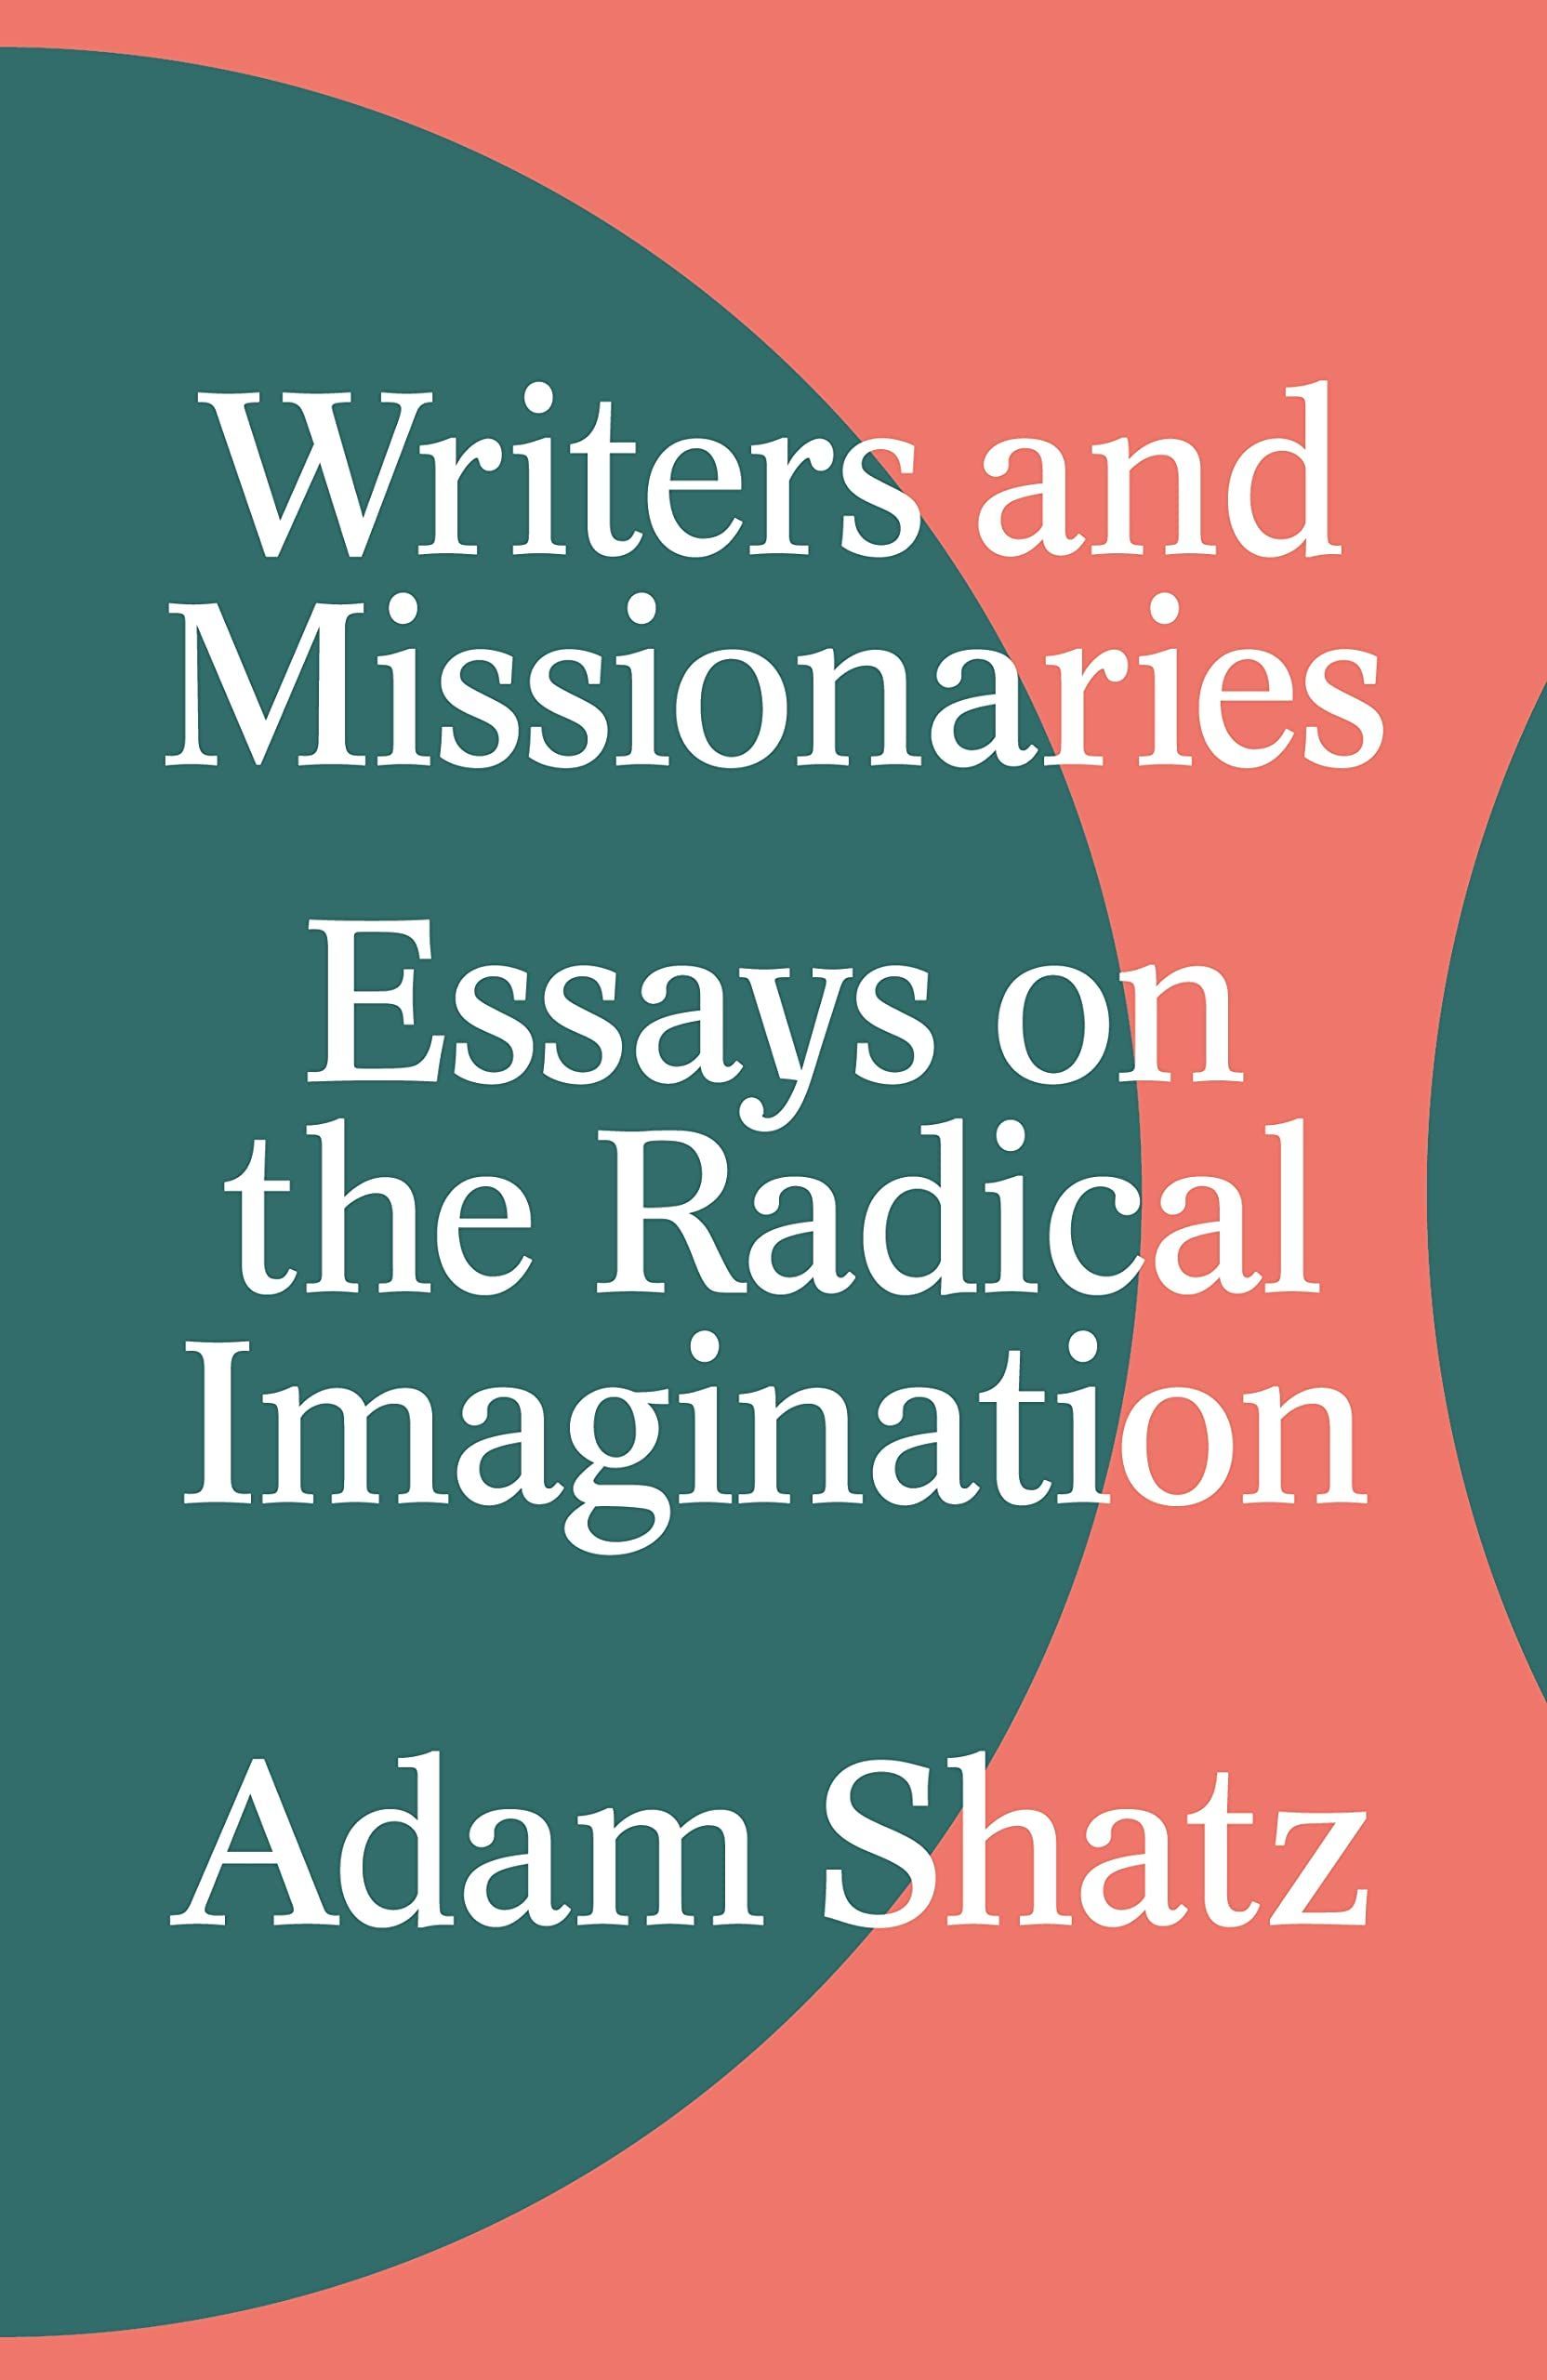 A Considerable Aura: On Adam Shatz’s “Writers and Missionaries”